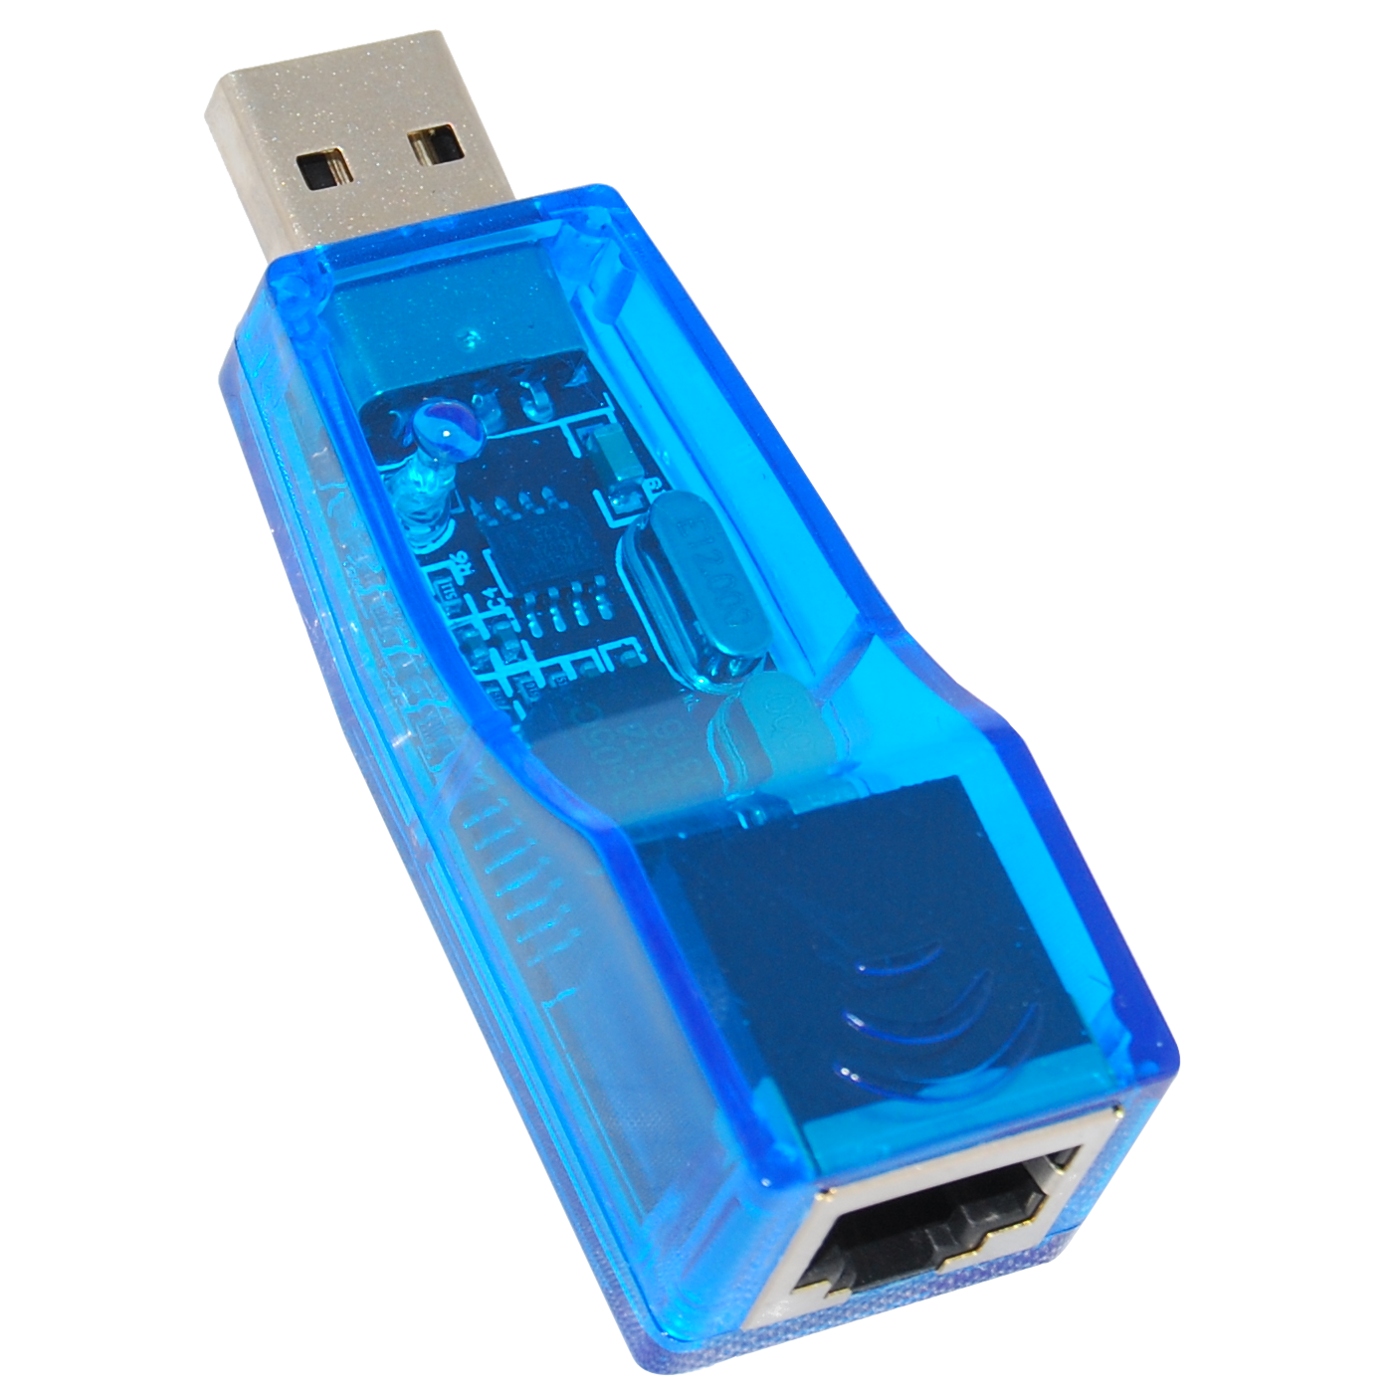 ch9200 usb ethernet adapter driver